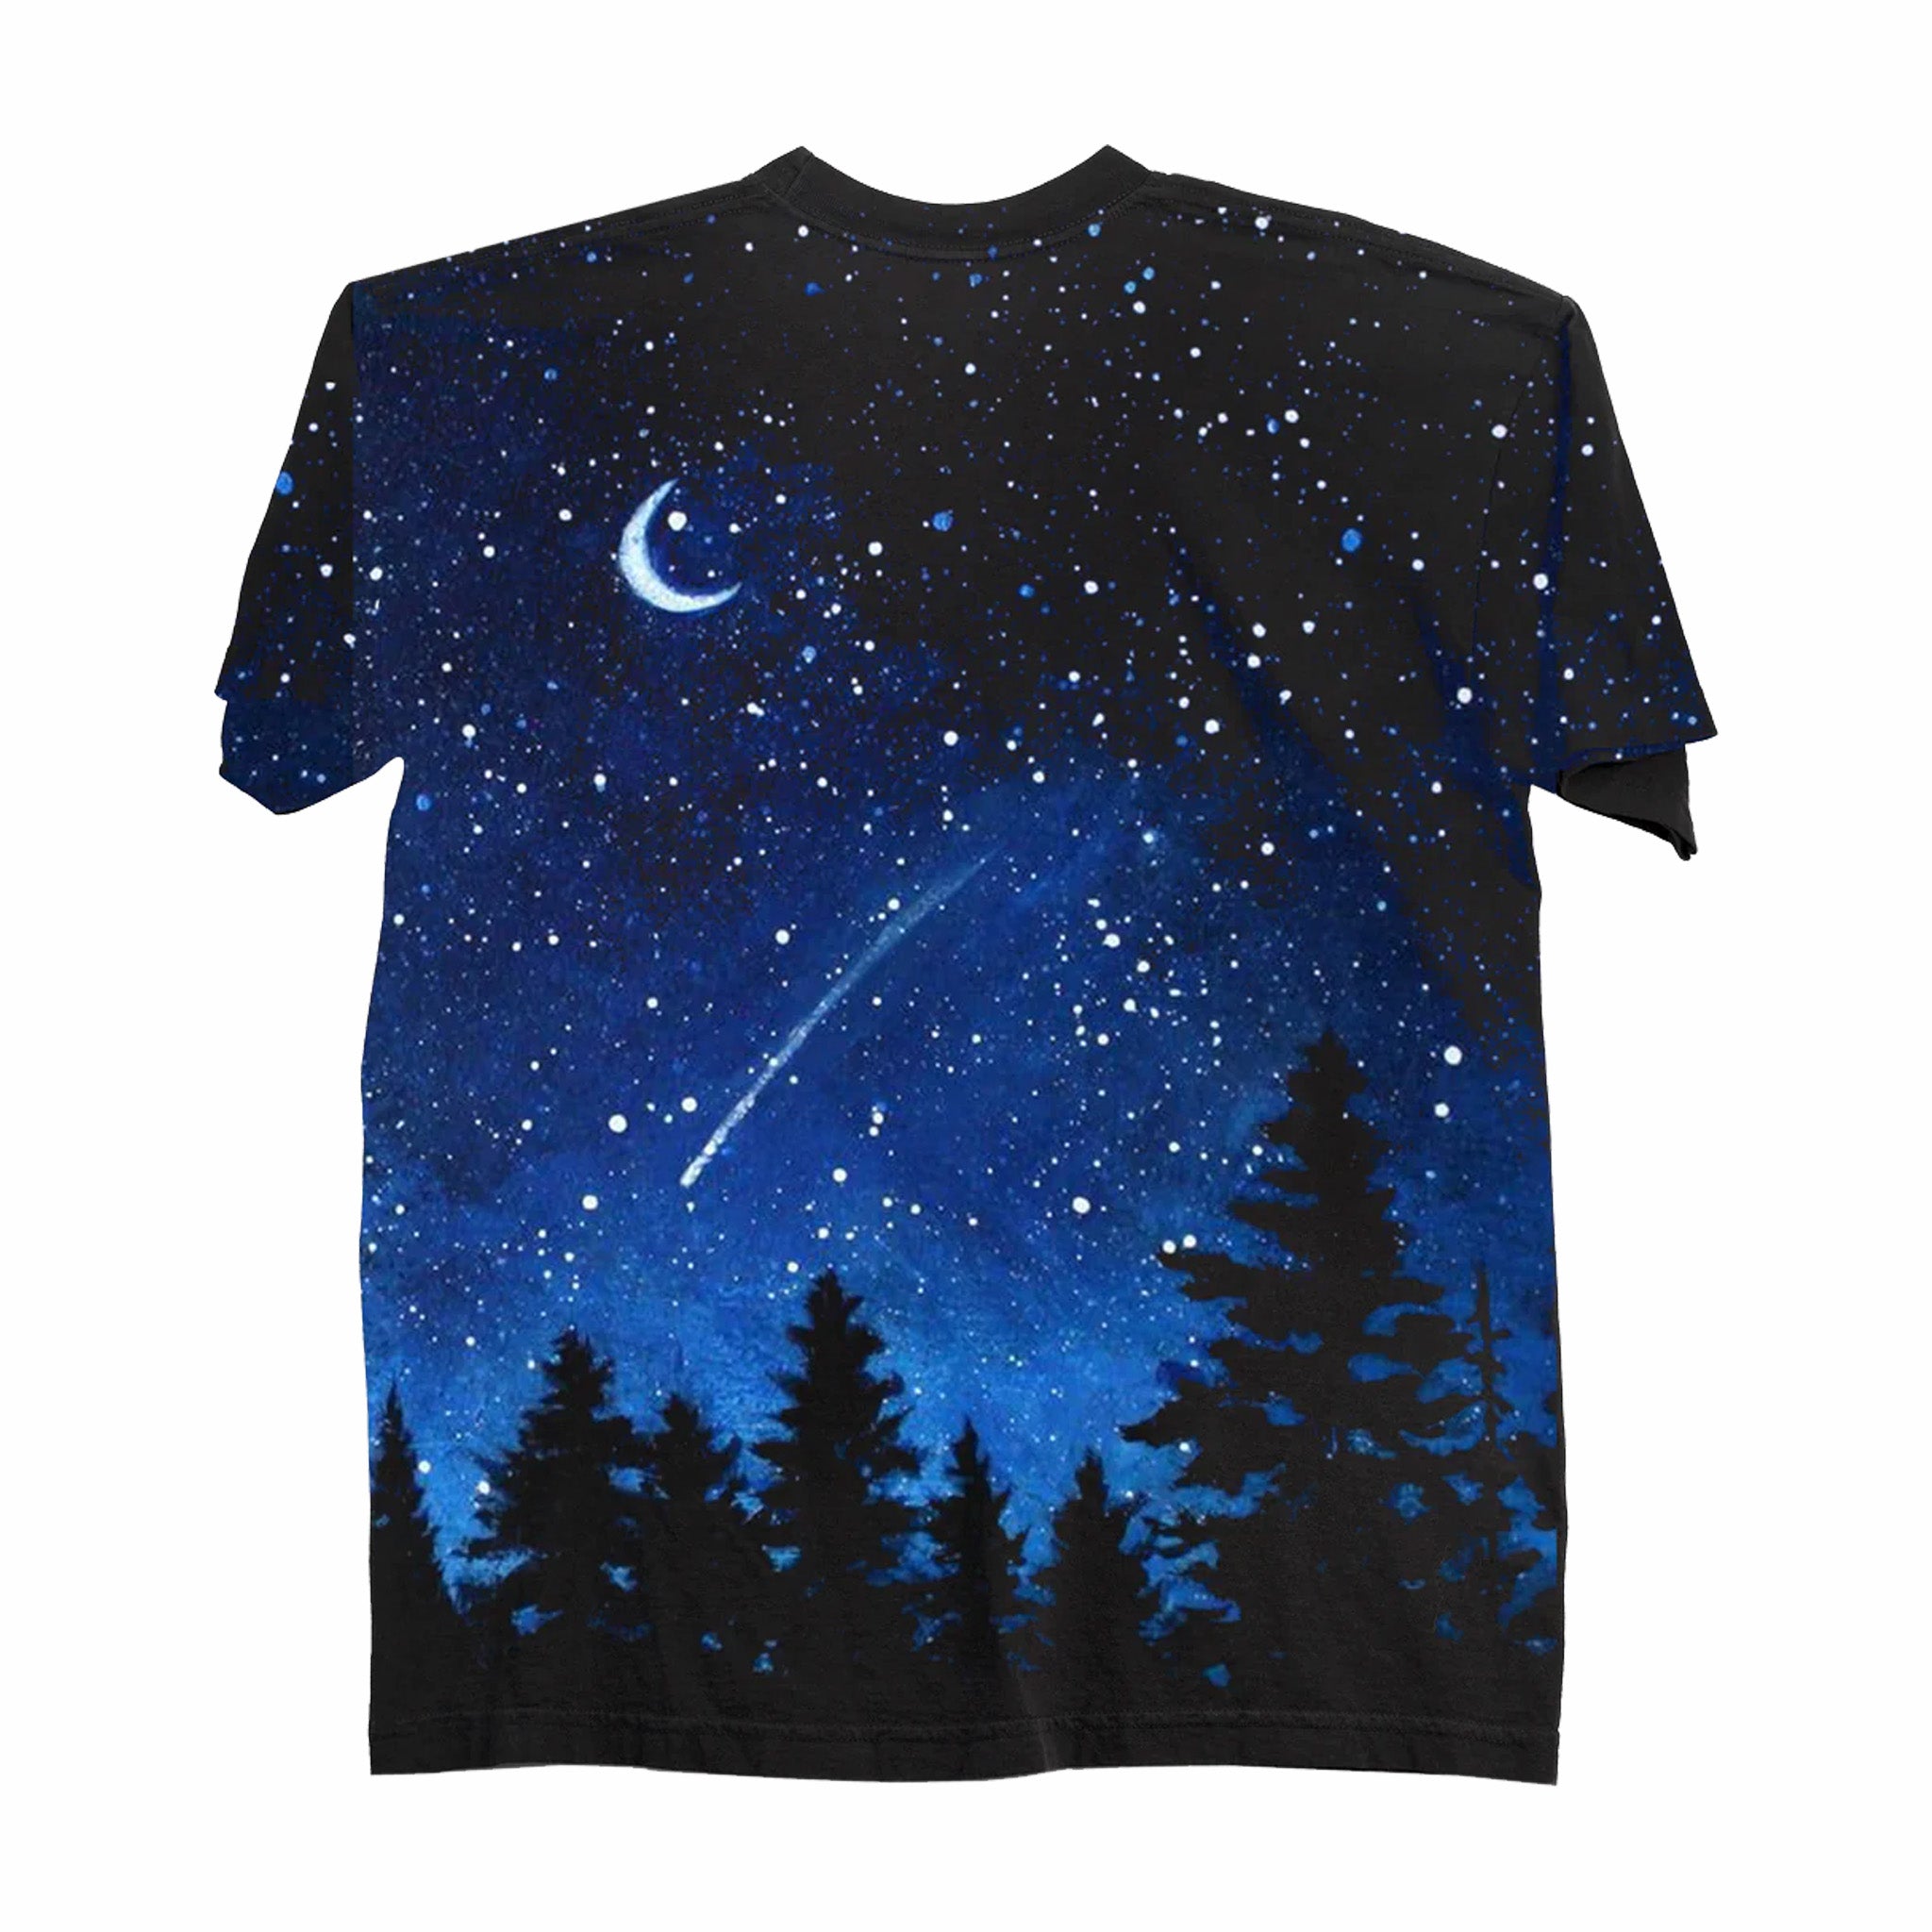 Online Ceramics “Stare at the Stars” SS Tee (Black) - August Shop